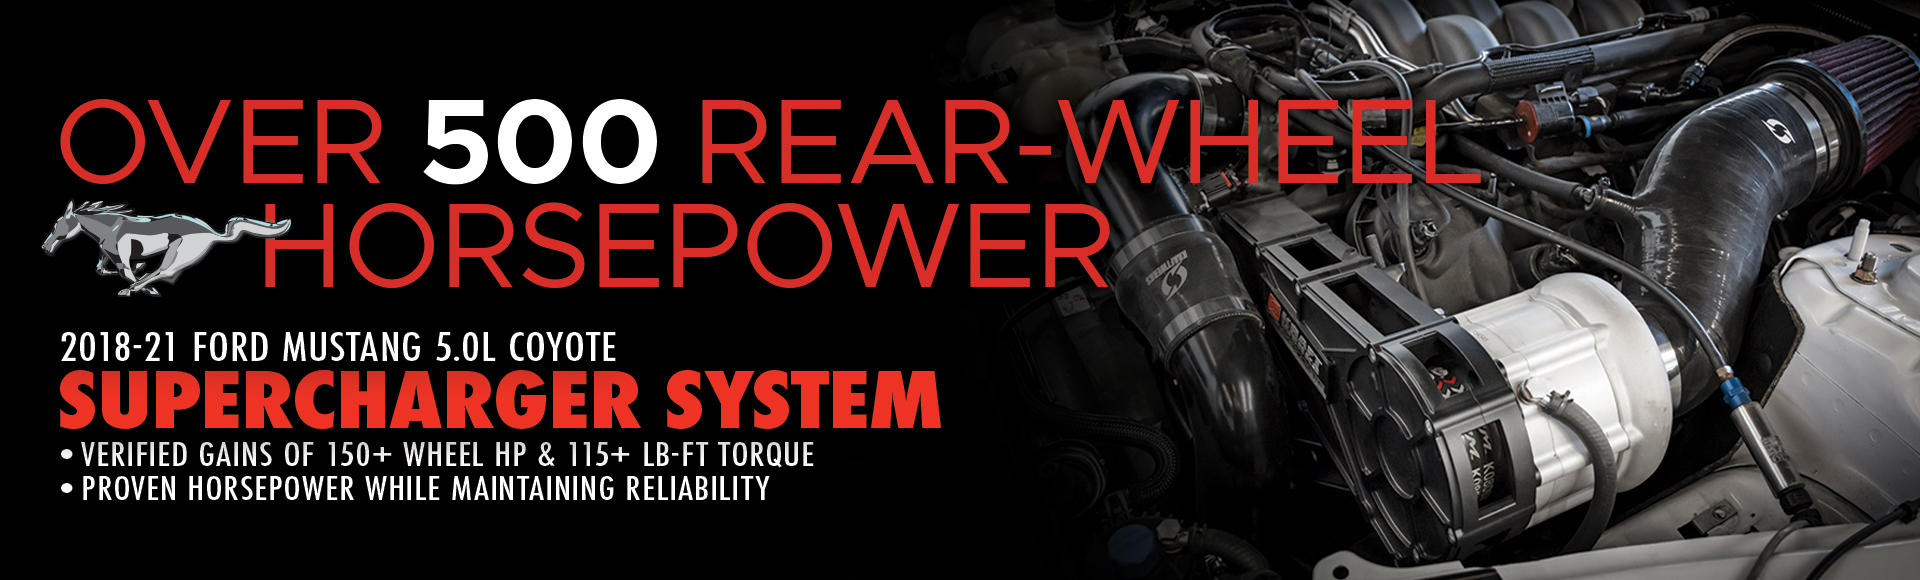 18-21 Ford Mustang 5.0L Coyote Supercharger System